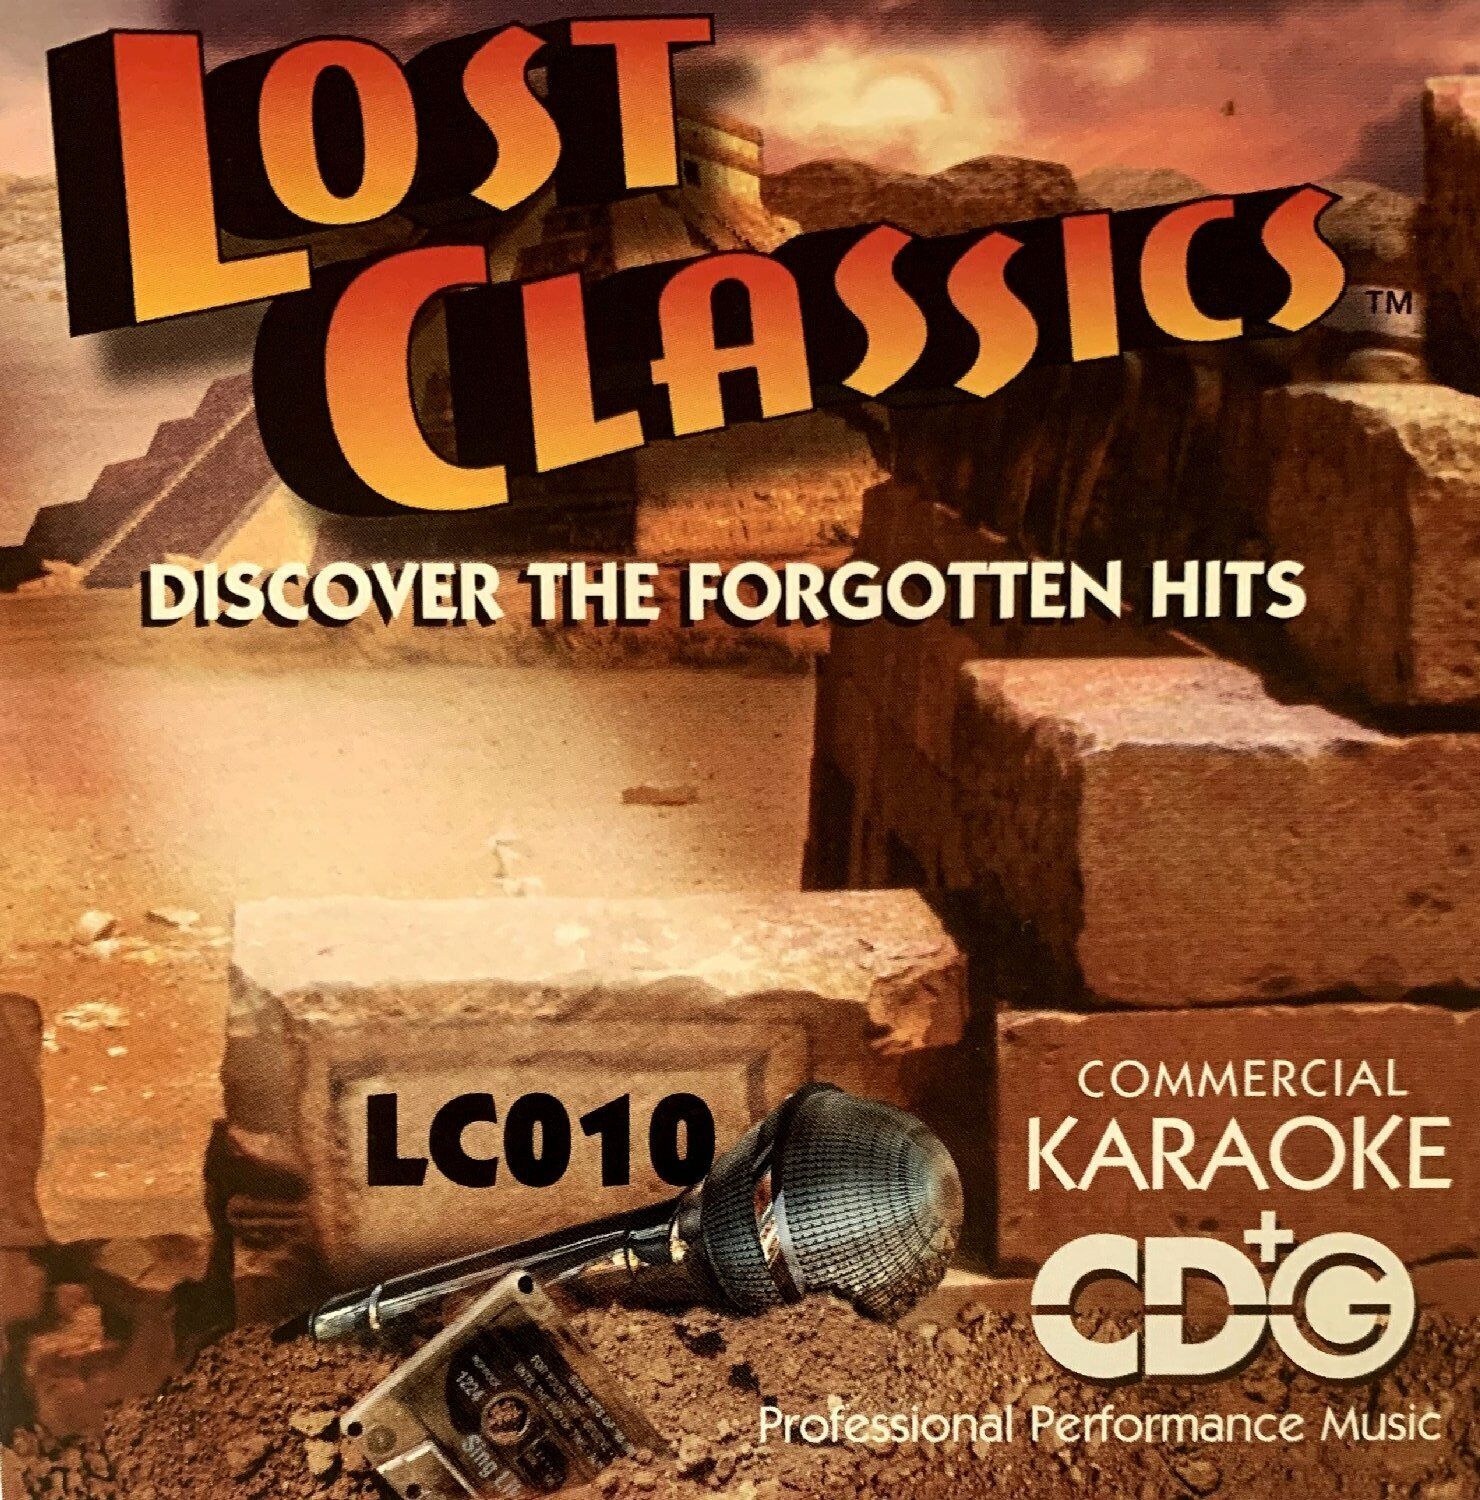 PRIDDIS KARAOKE - LOST CLASSICS Department store HARD 80'S TO Complete Free Shipping FIND 60'S SONGS